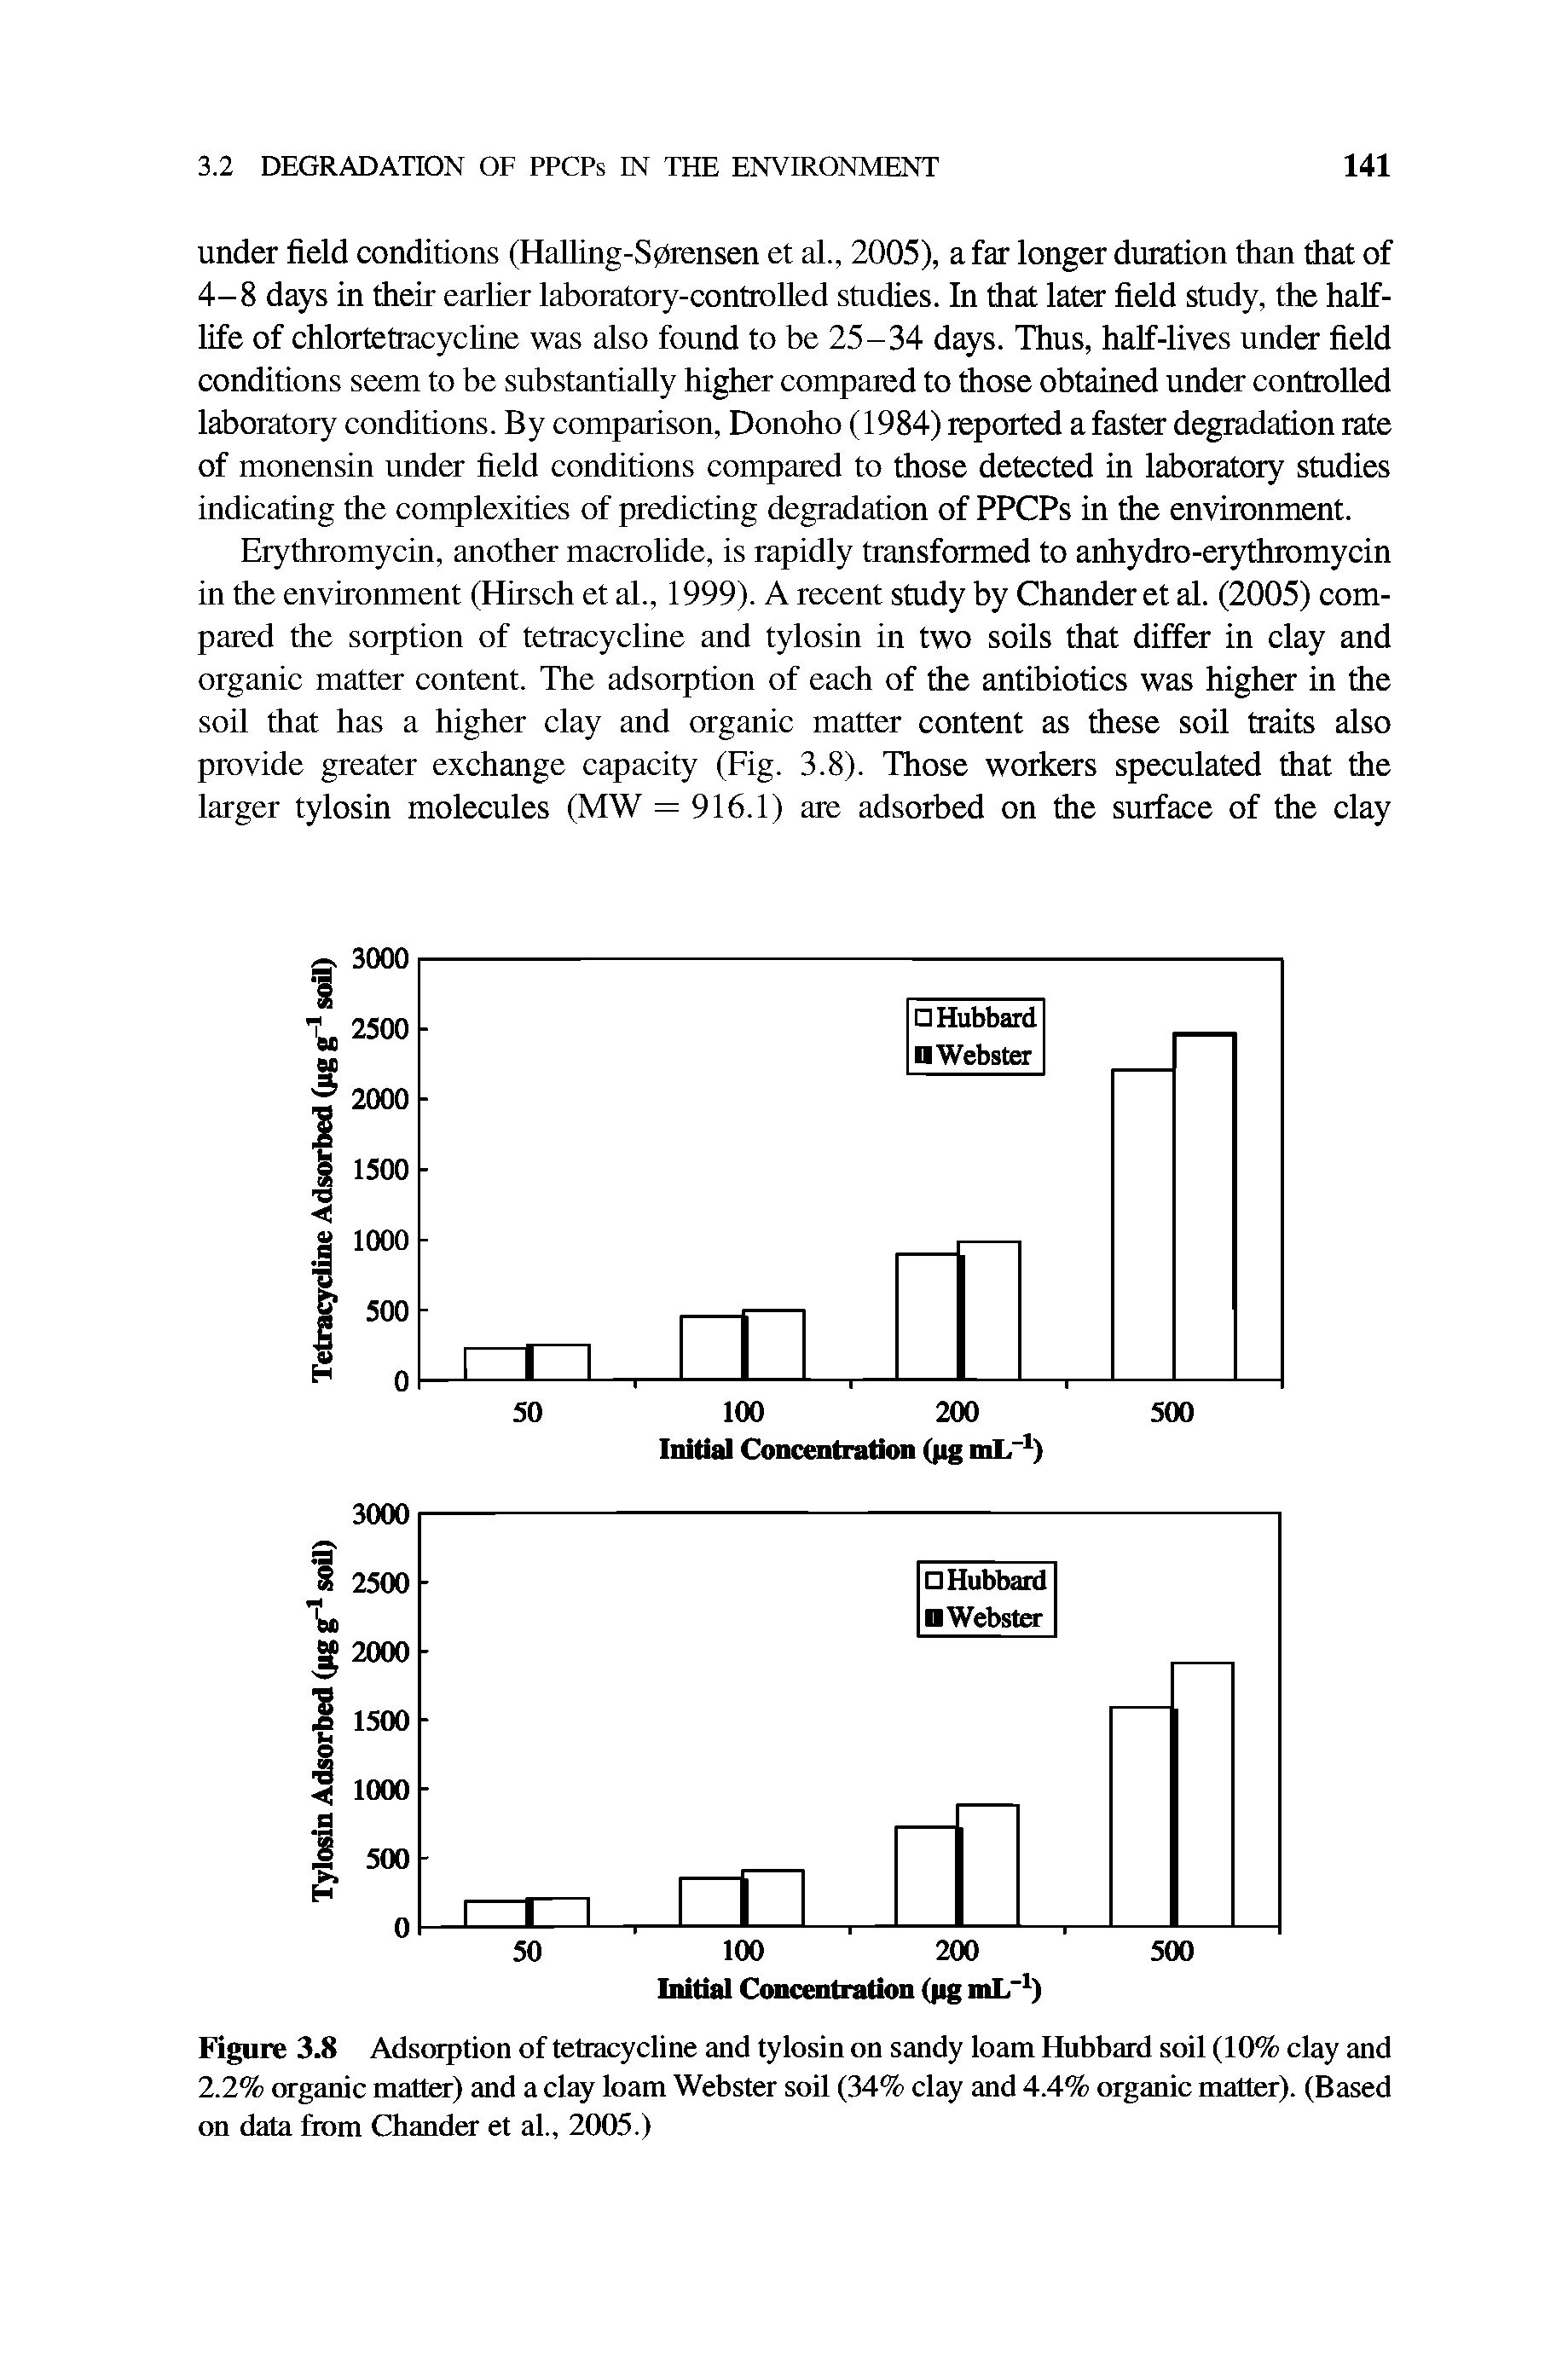 Figure 3.8 Adsorption of tetracycline and tylosin on sandy loam Hubbard soil (10% clay and 2.2% organic matter) and a clay loam Webster soil (34% clay and 4.4% organic matter). (Based on data from Cbander et al., 2005.)...